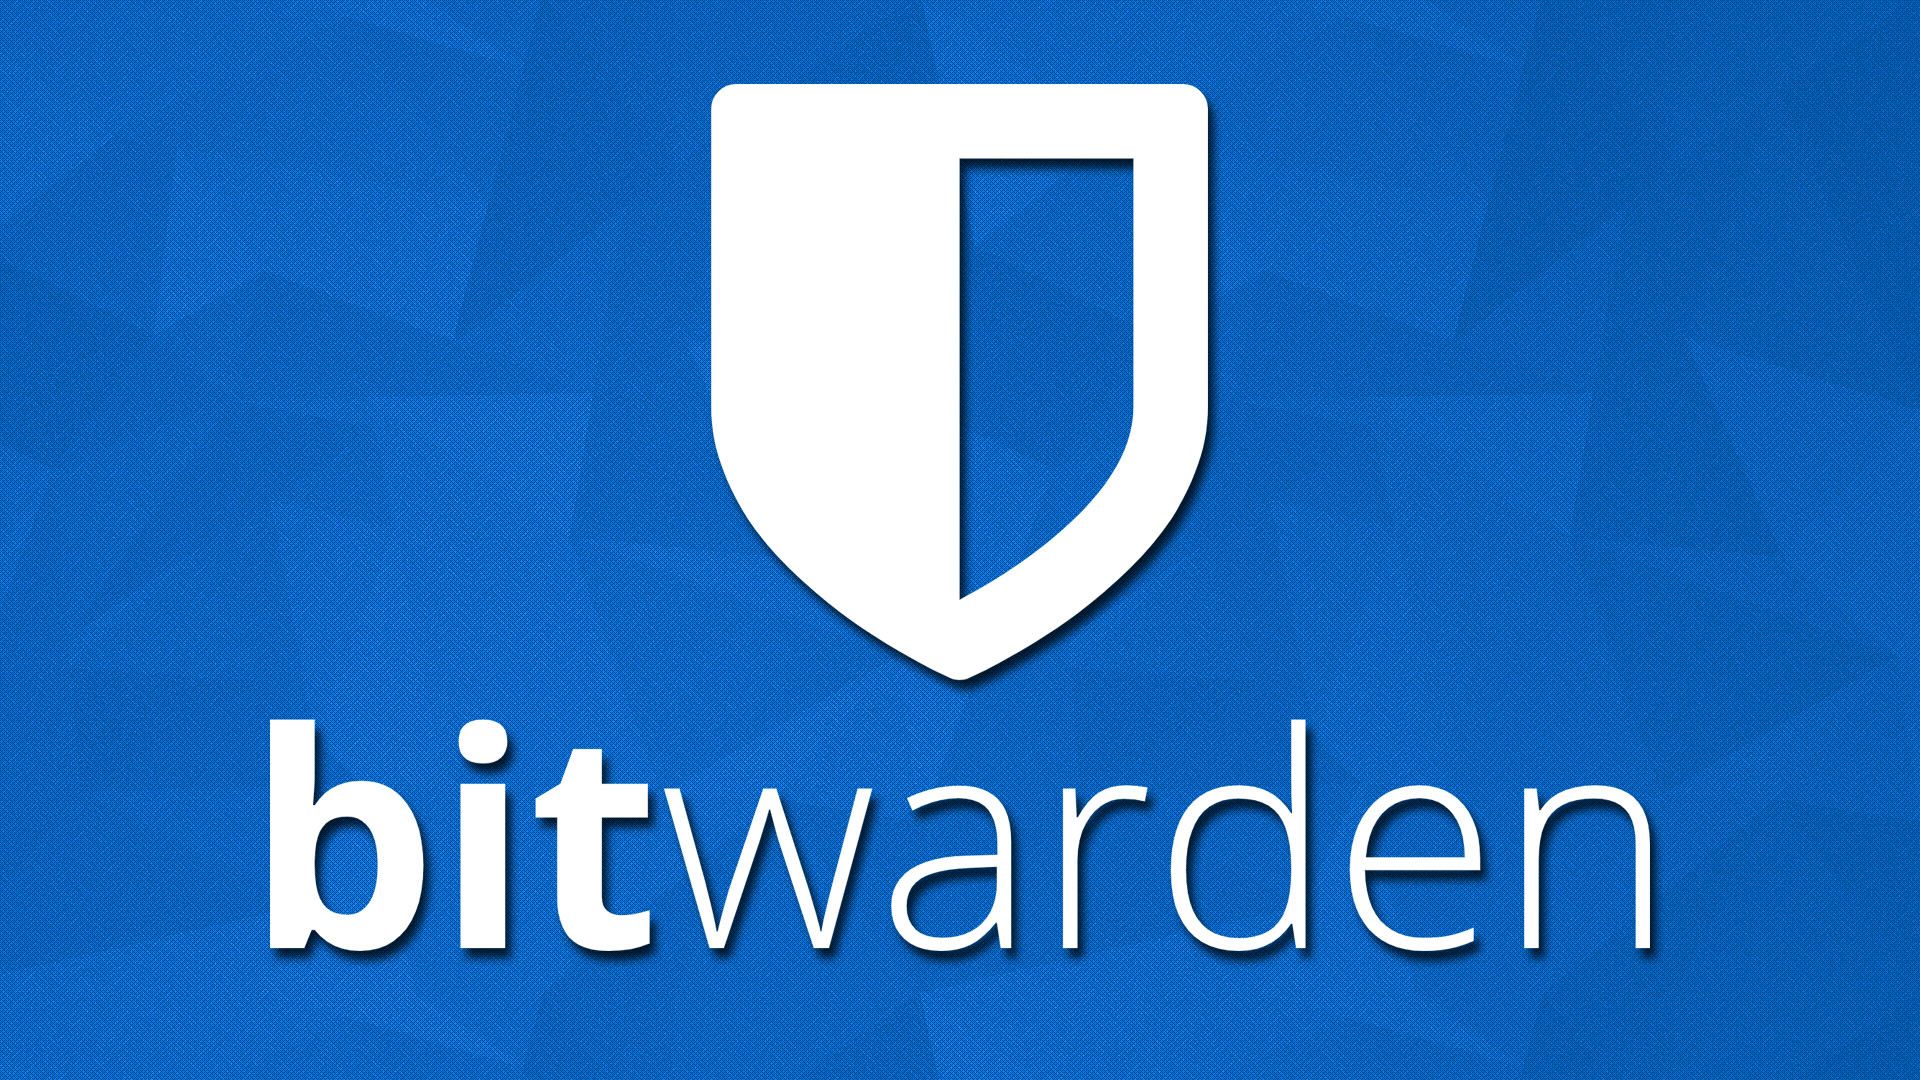 Bitwarden Enhances User Experience with New In-Line Autofill Feature